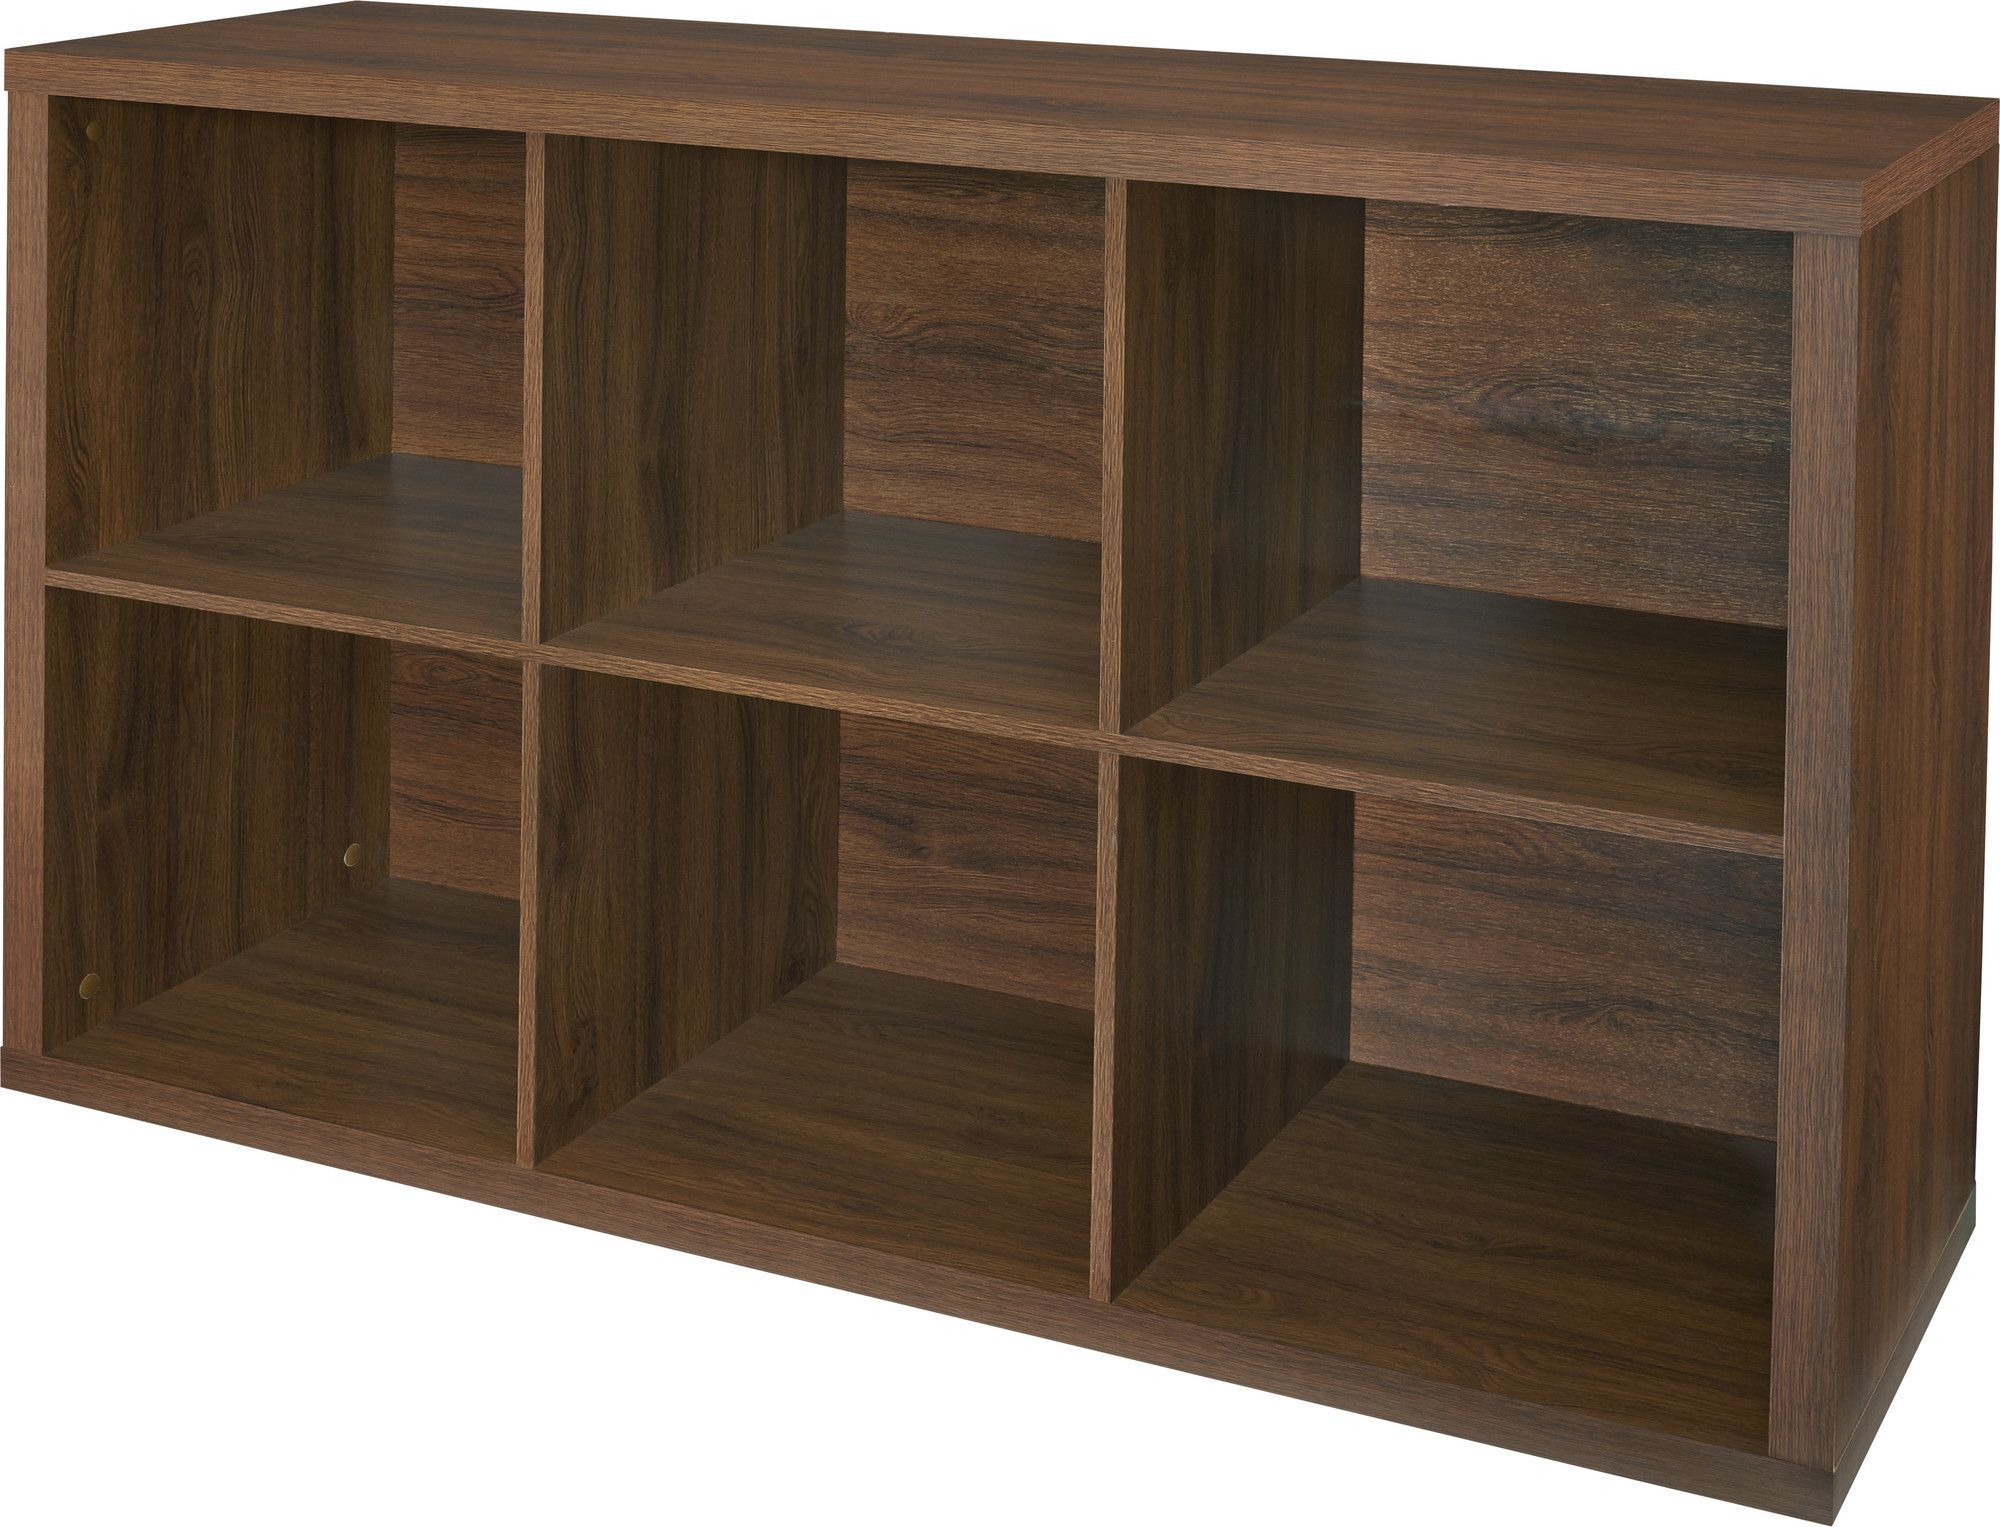 Finkelstein Cube Bookcases In Most Up To Date Pinterest – Пинтерест (View 16 of 20)